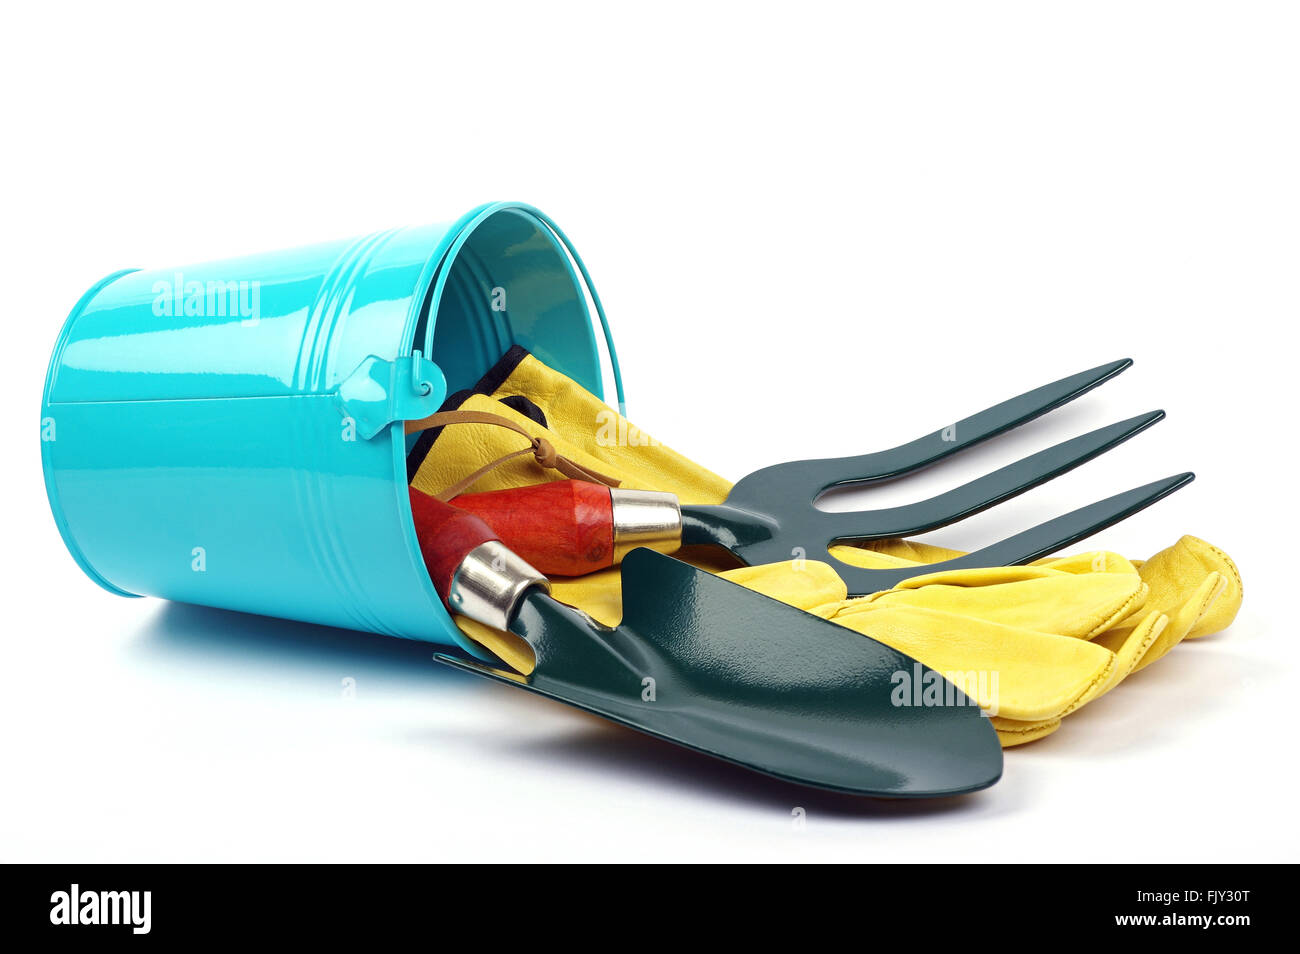 gardening tools including a green fork and green trowel with yellow gloves and a blue garden bucket on a clean white background Stock Photo